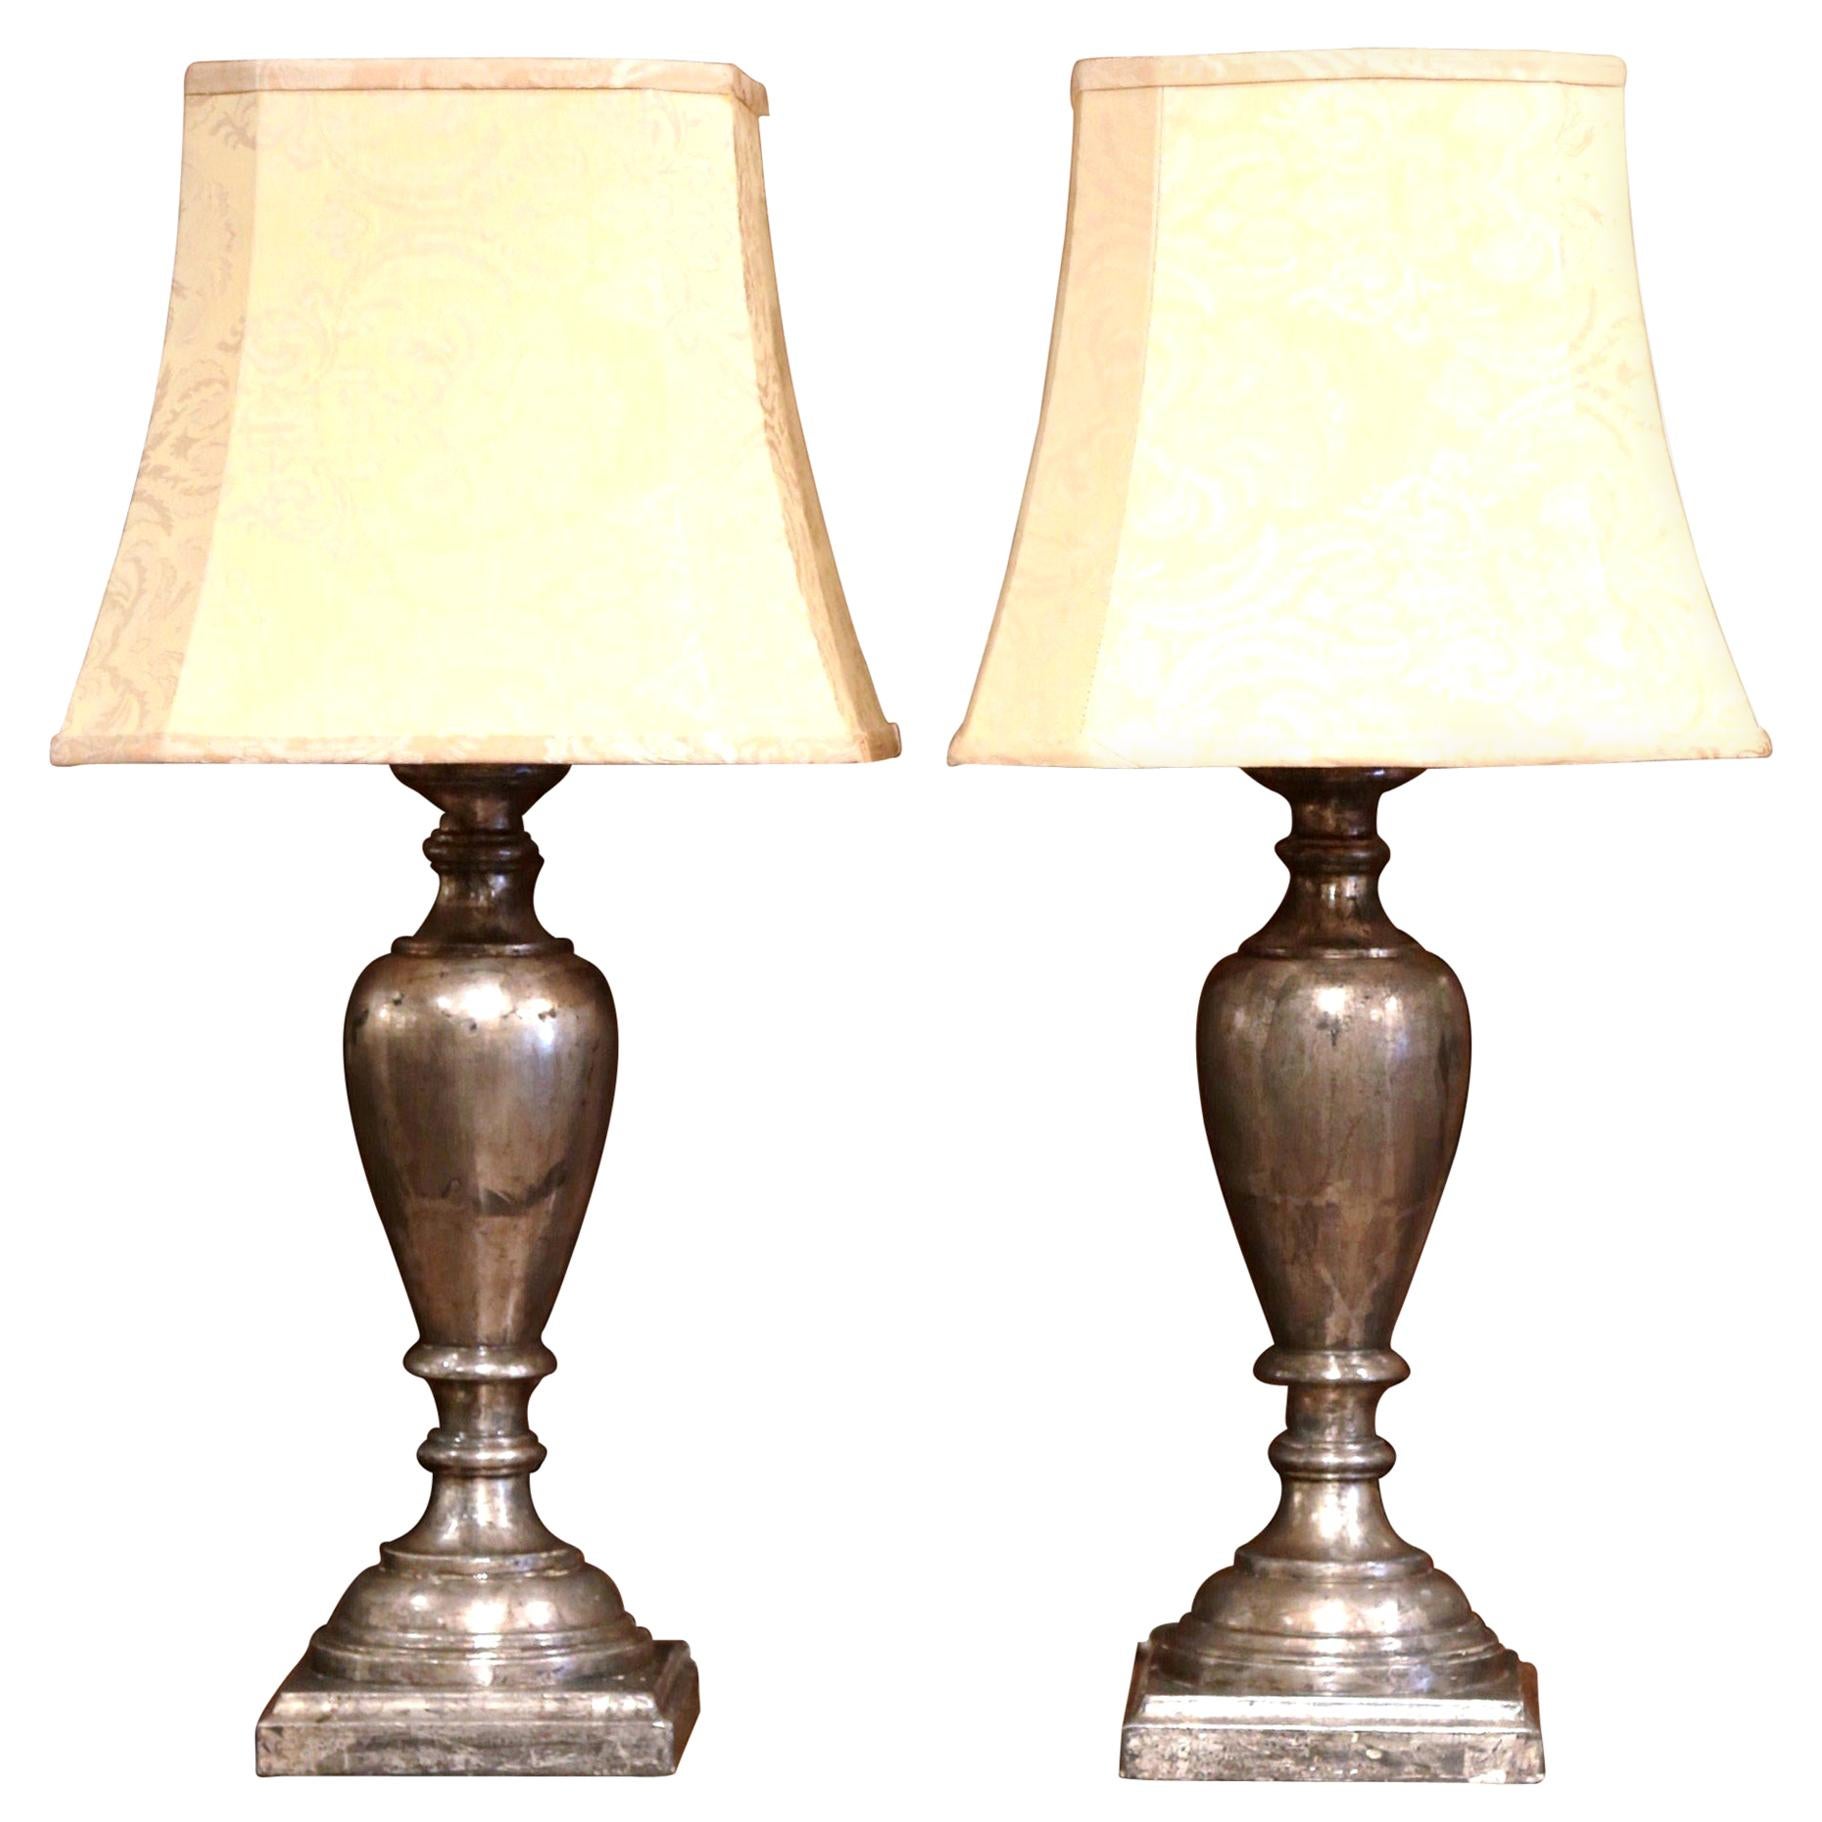 Pair of Italian Carved Silver Leaf Two-Light Urn Table Lamps